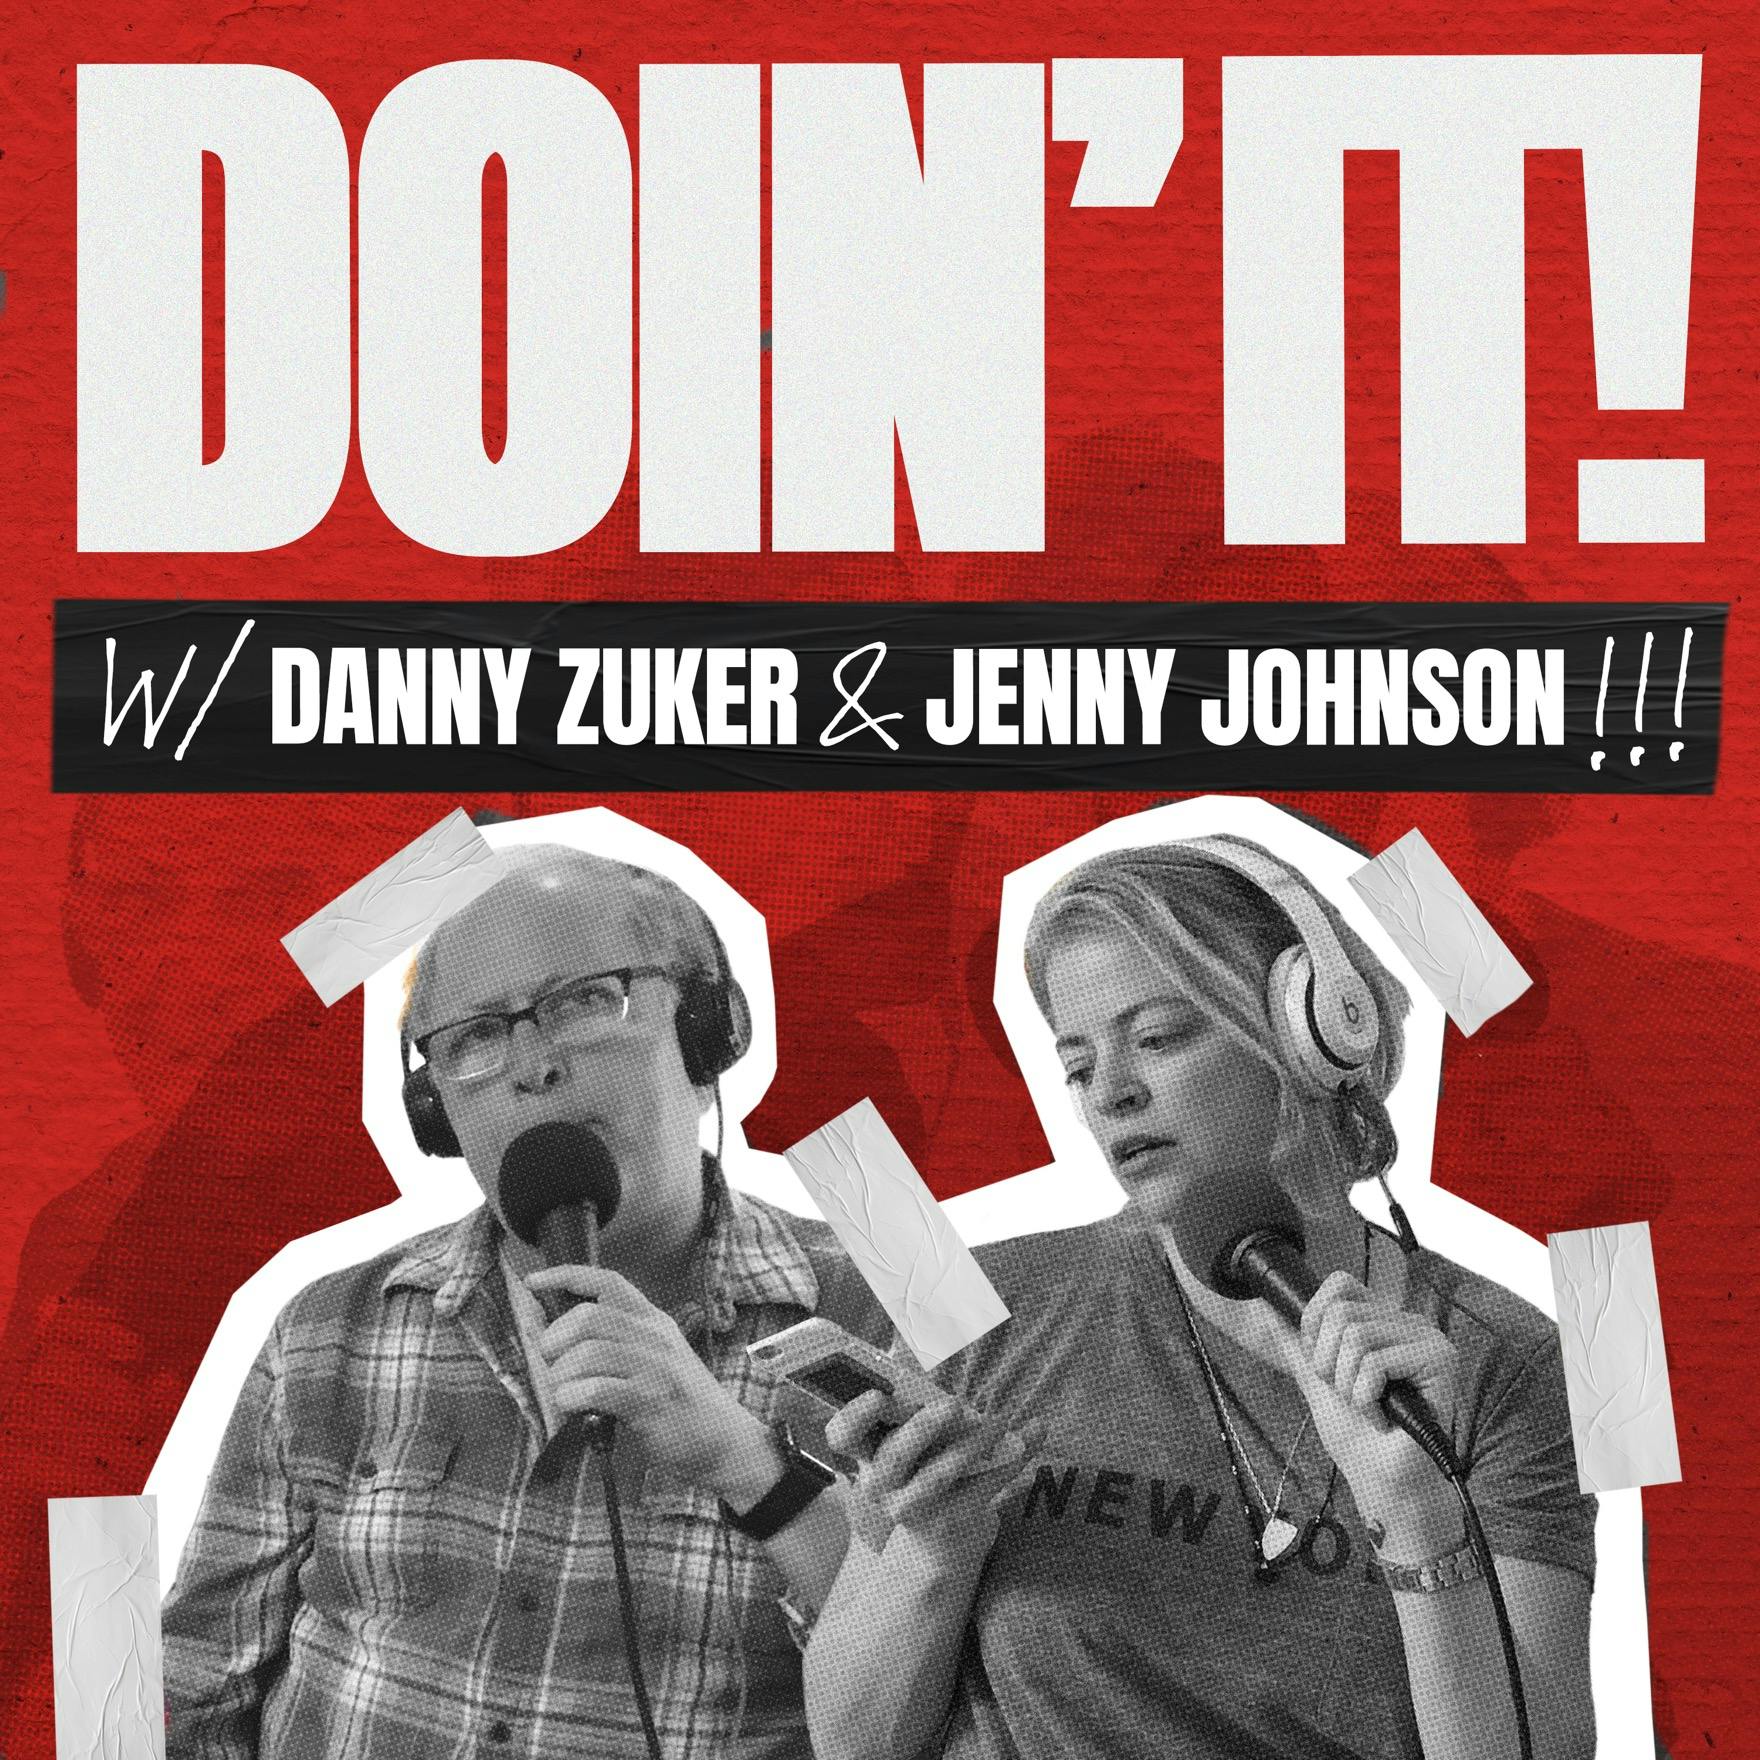 Best of Doin’ It! With Danny Zuker and Jenny Johnson - Comedian, Actor and Radio Host Tom Papa